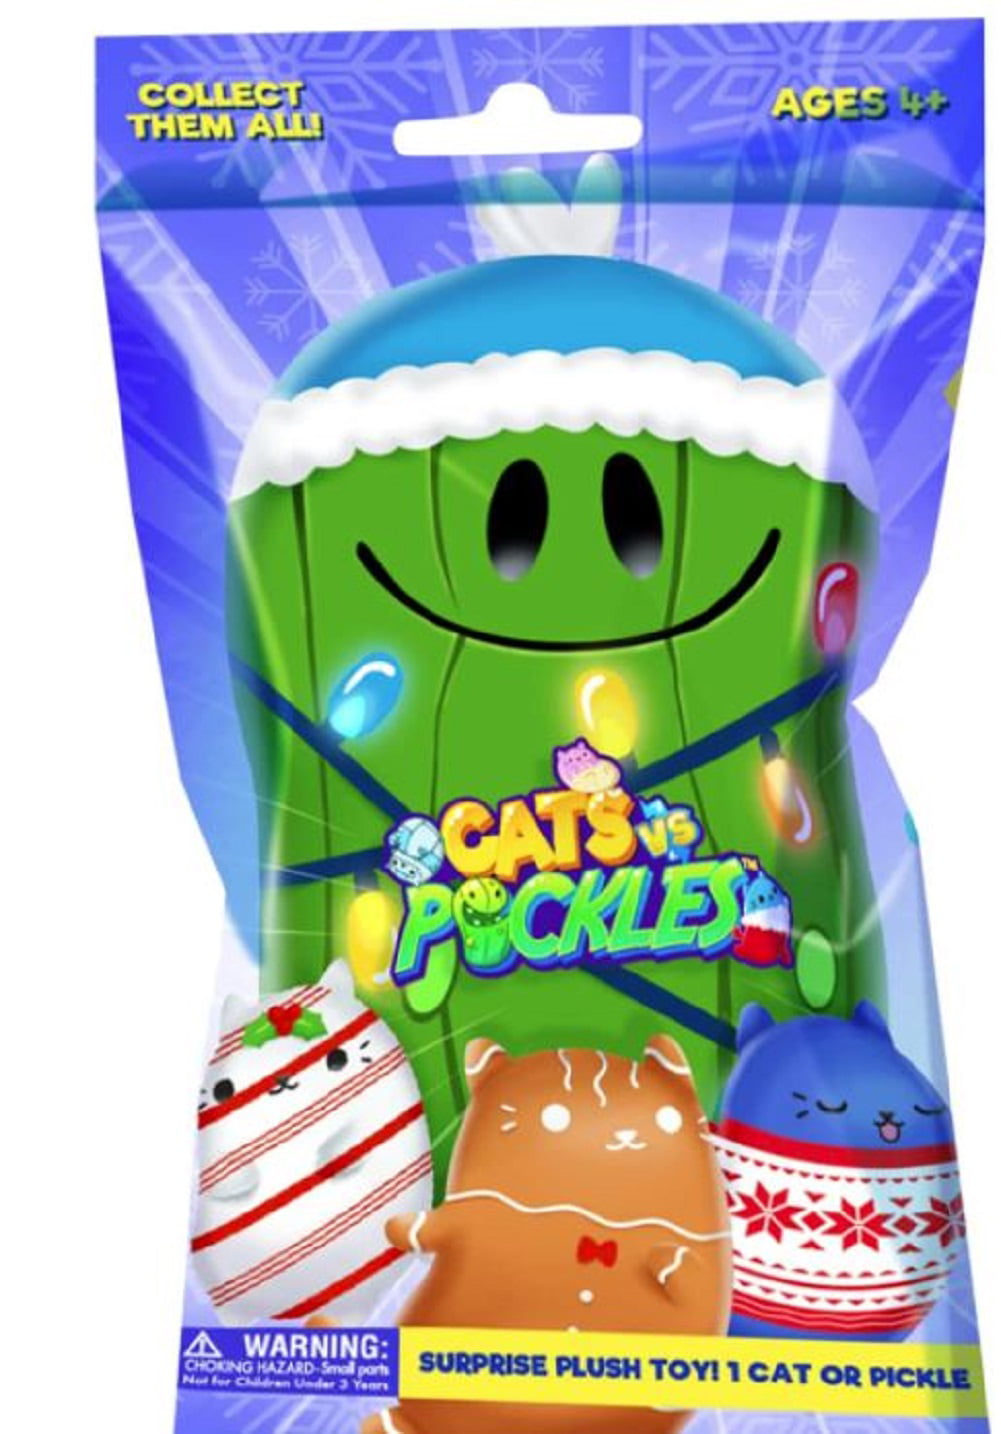 Limited Edition Holiday Mystery Bags 4 Bean Filled Plushies Great for Holiday Exchanges & Under $10 Gifts. 1pk Cats vs Pickles Purr-FECT Stocking Stuffers and Teacher Gifts 